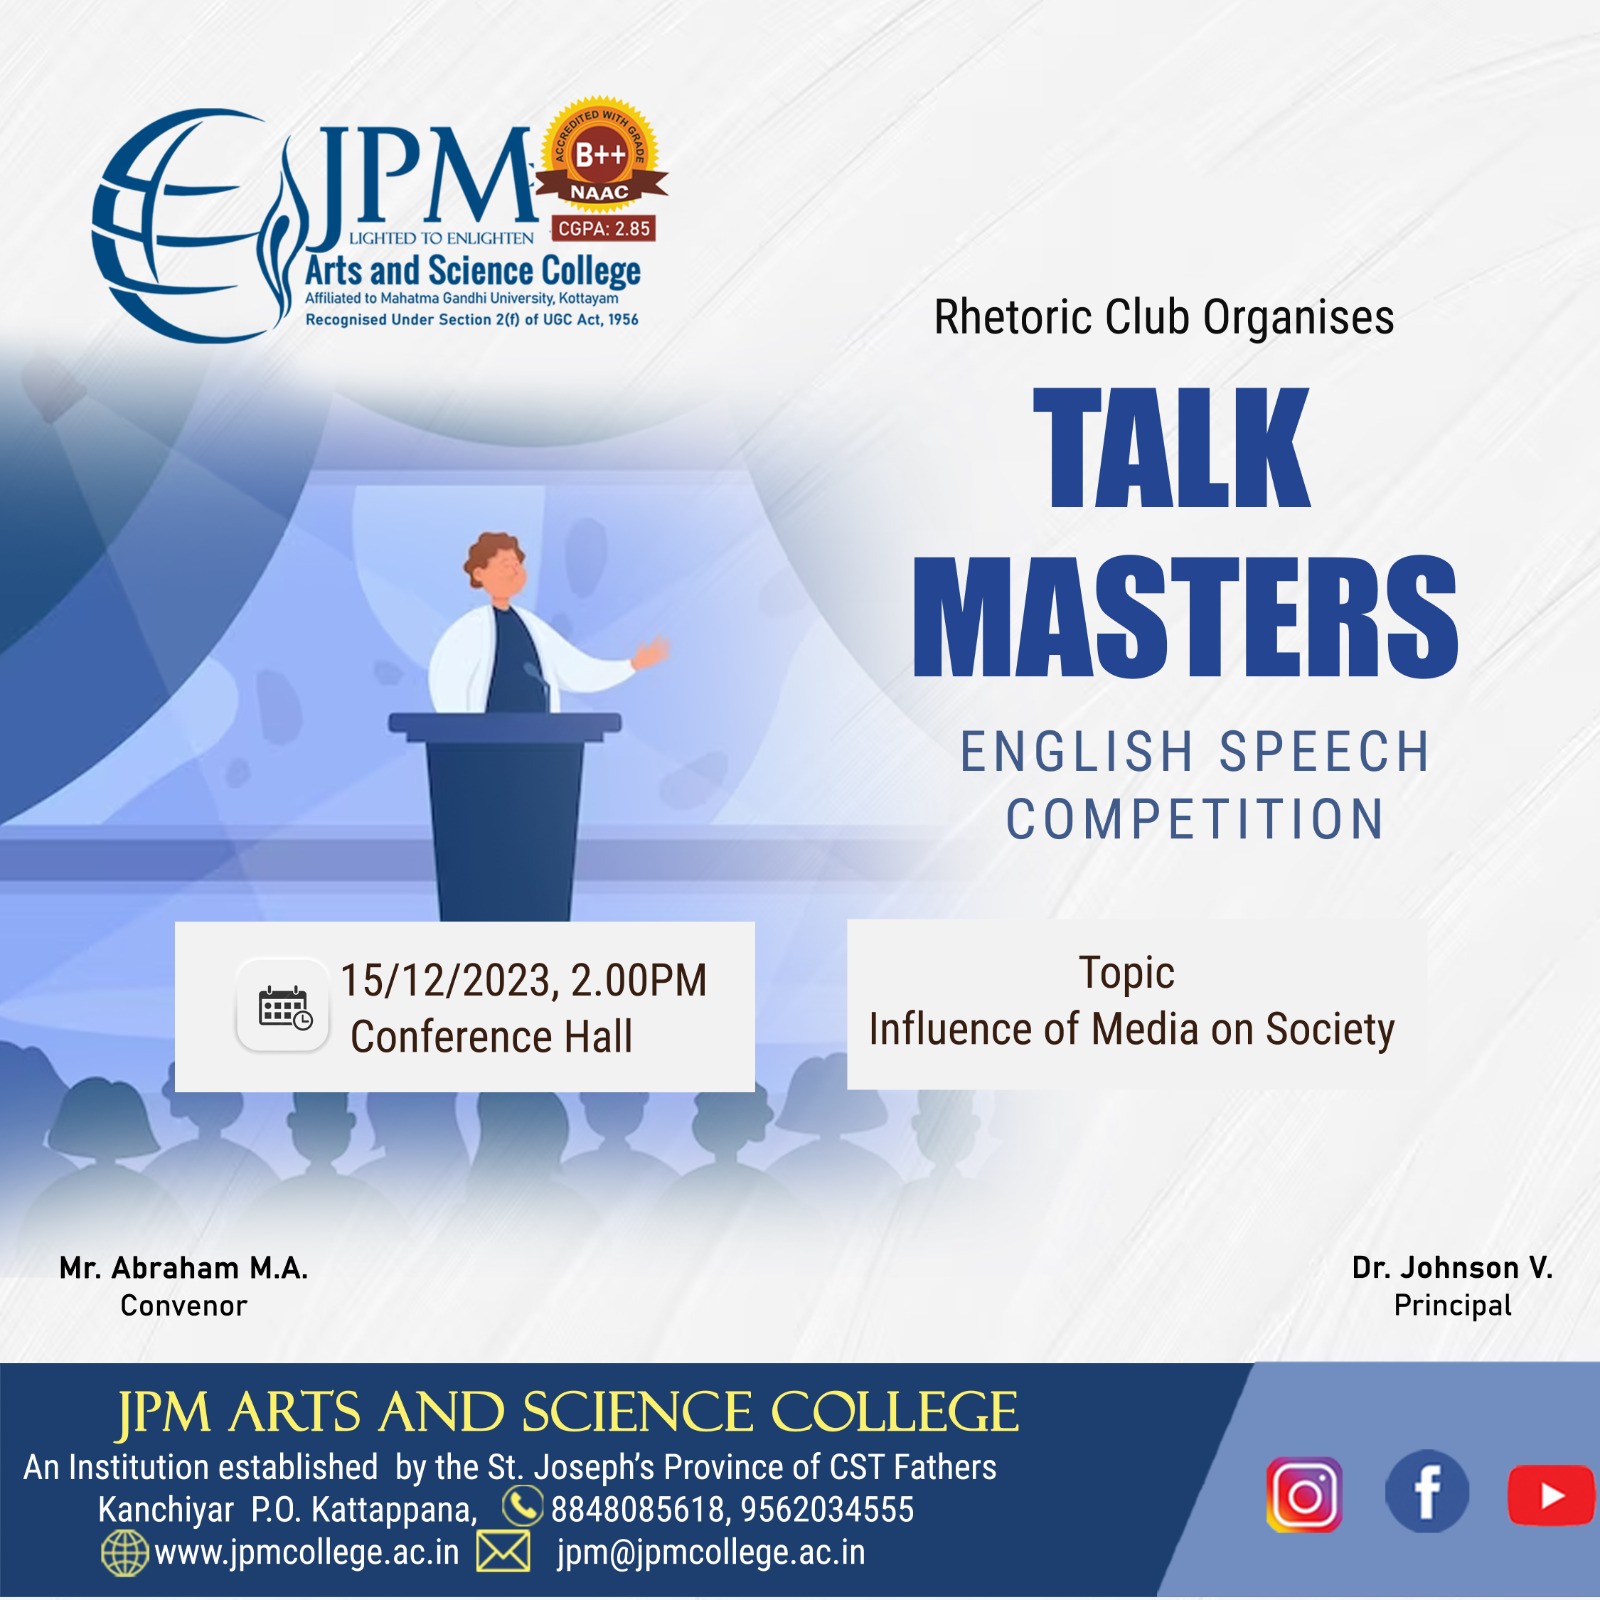 TALK MASTERS ENGLISH SPEECH COMPETITION